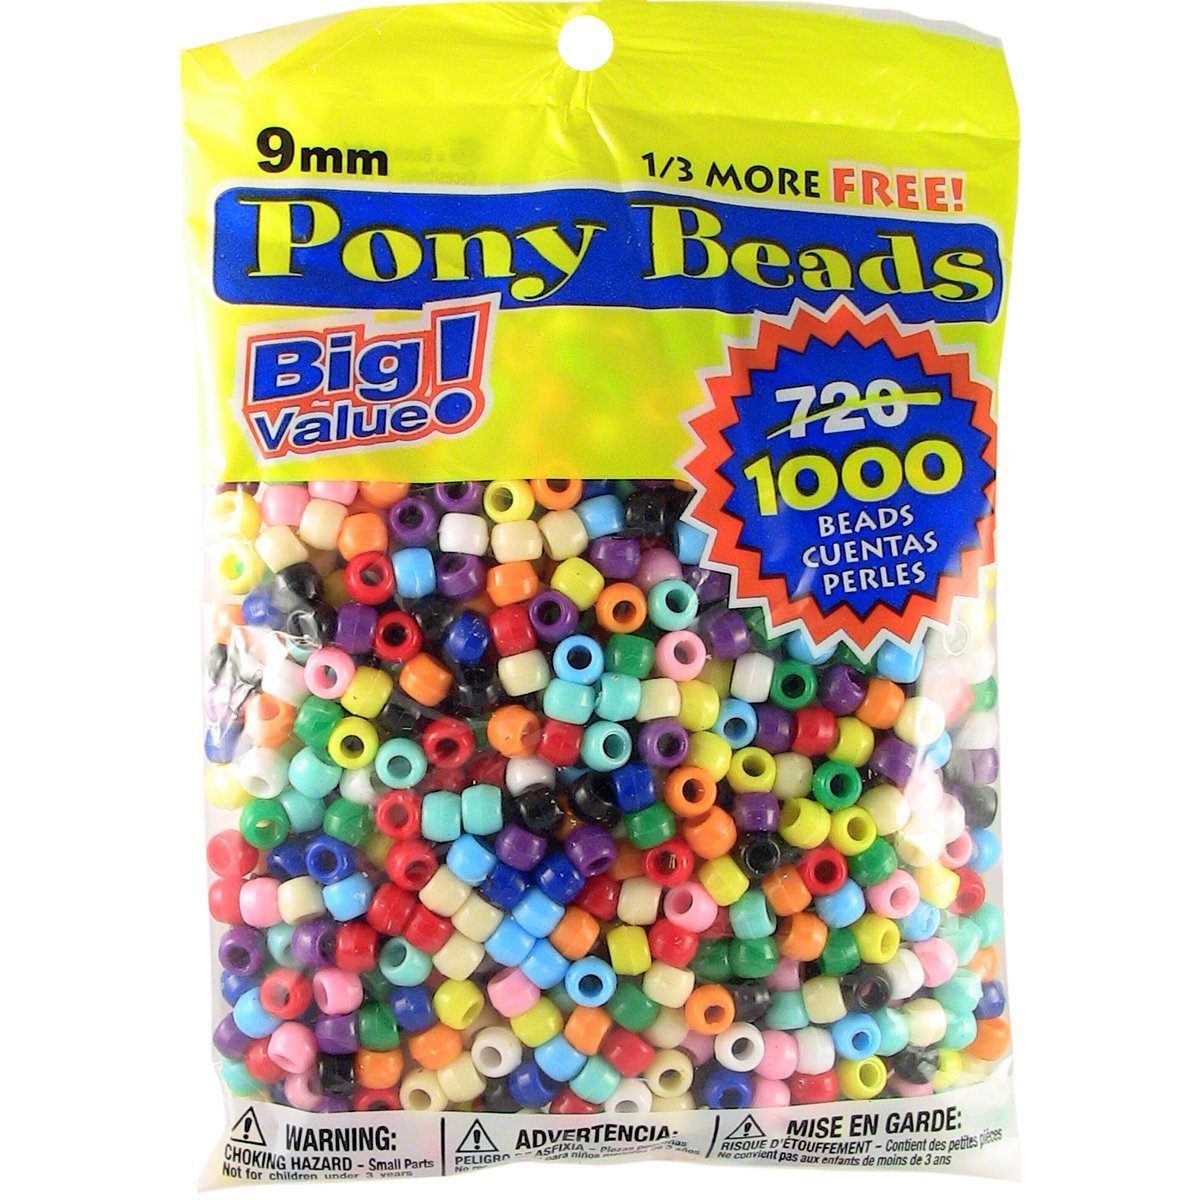 Pony Beads Multi Color 9mm 1000 Pcs in Bag (3 Pack)